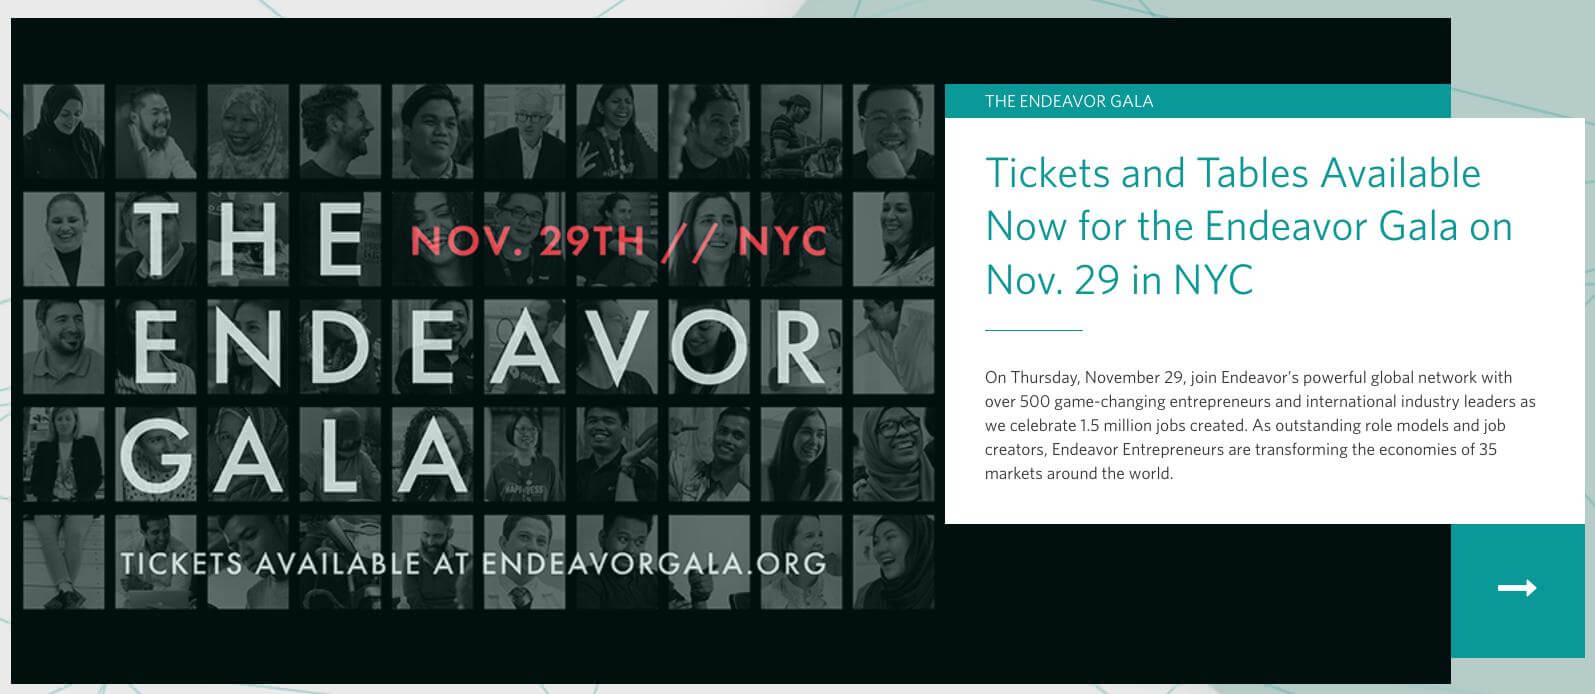 Endeavor events and Gala in New York City